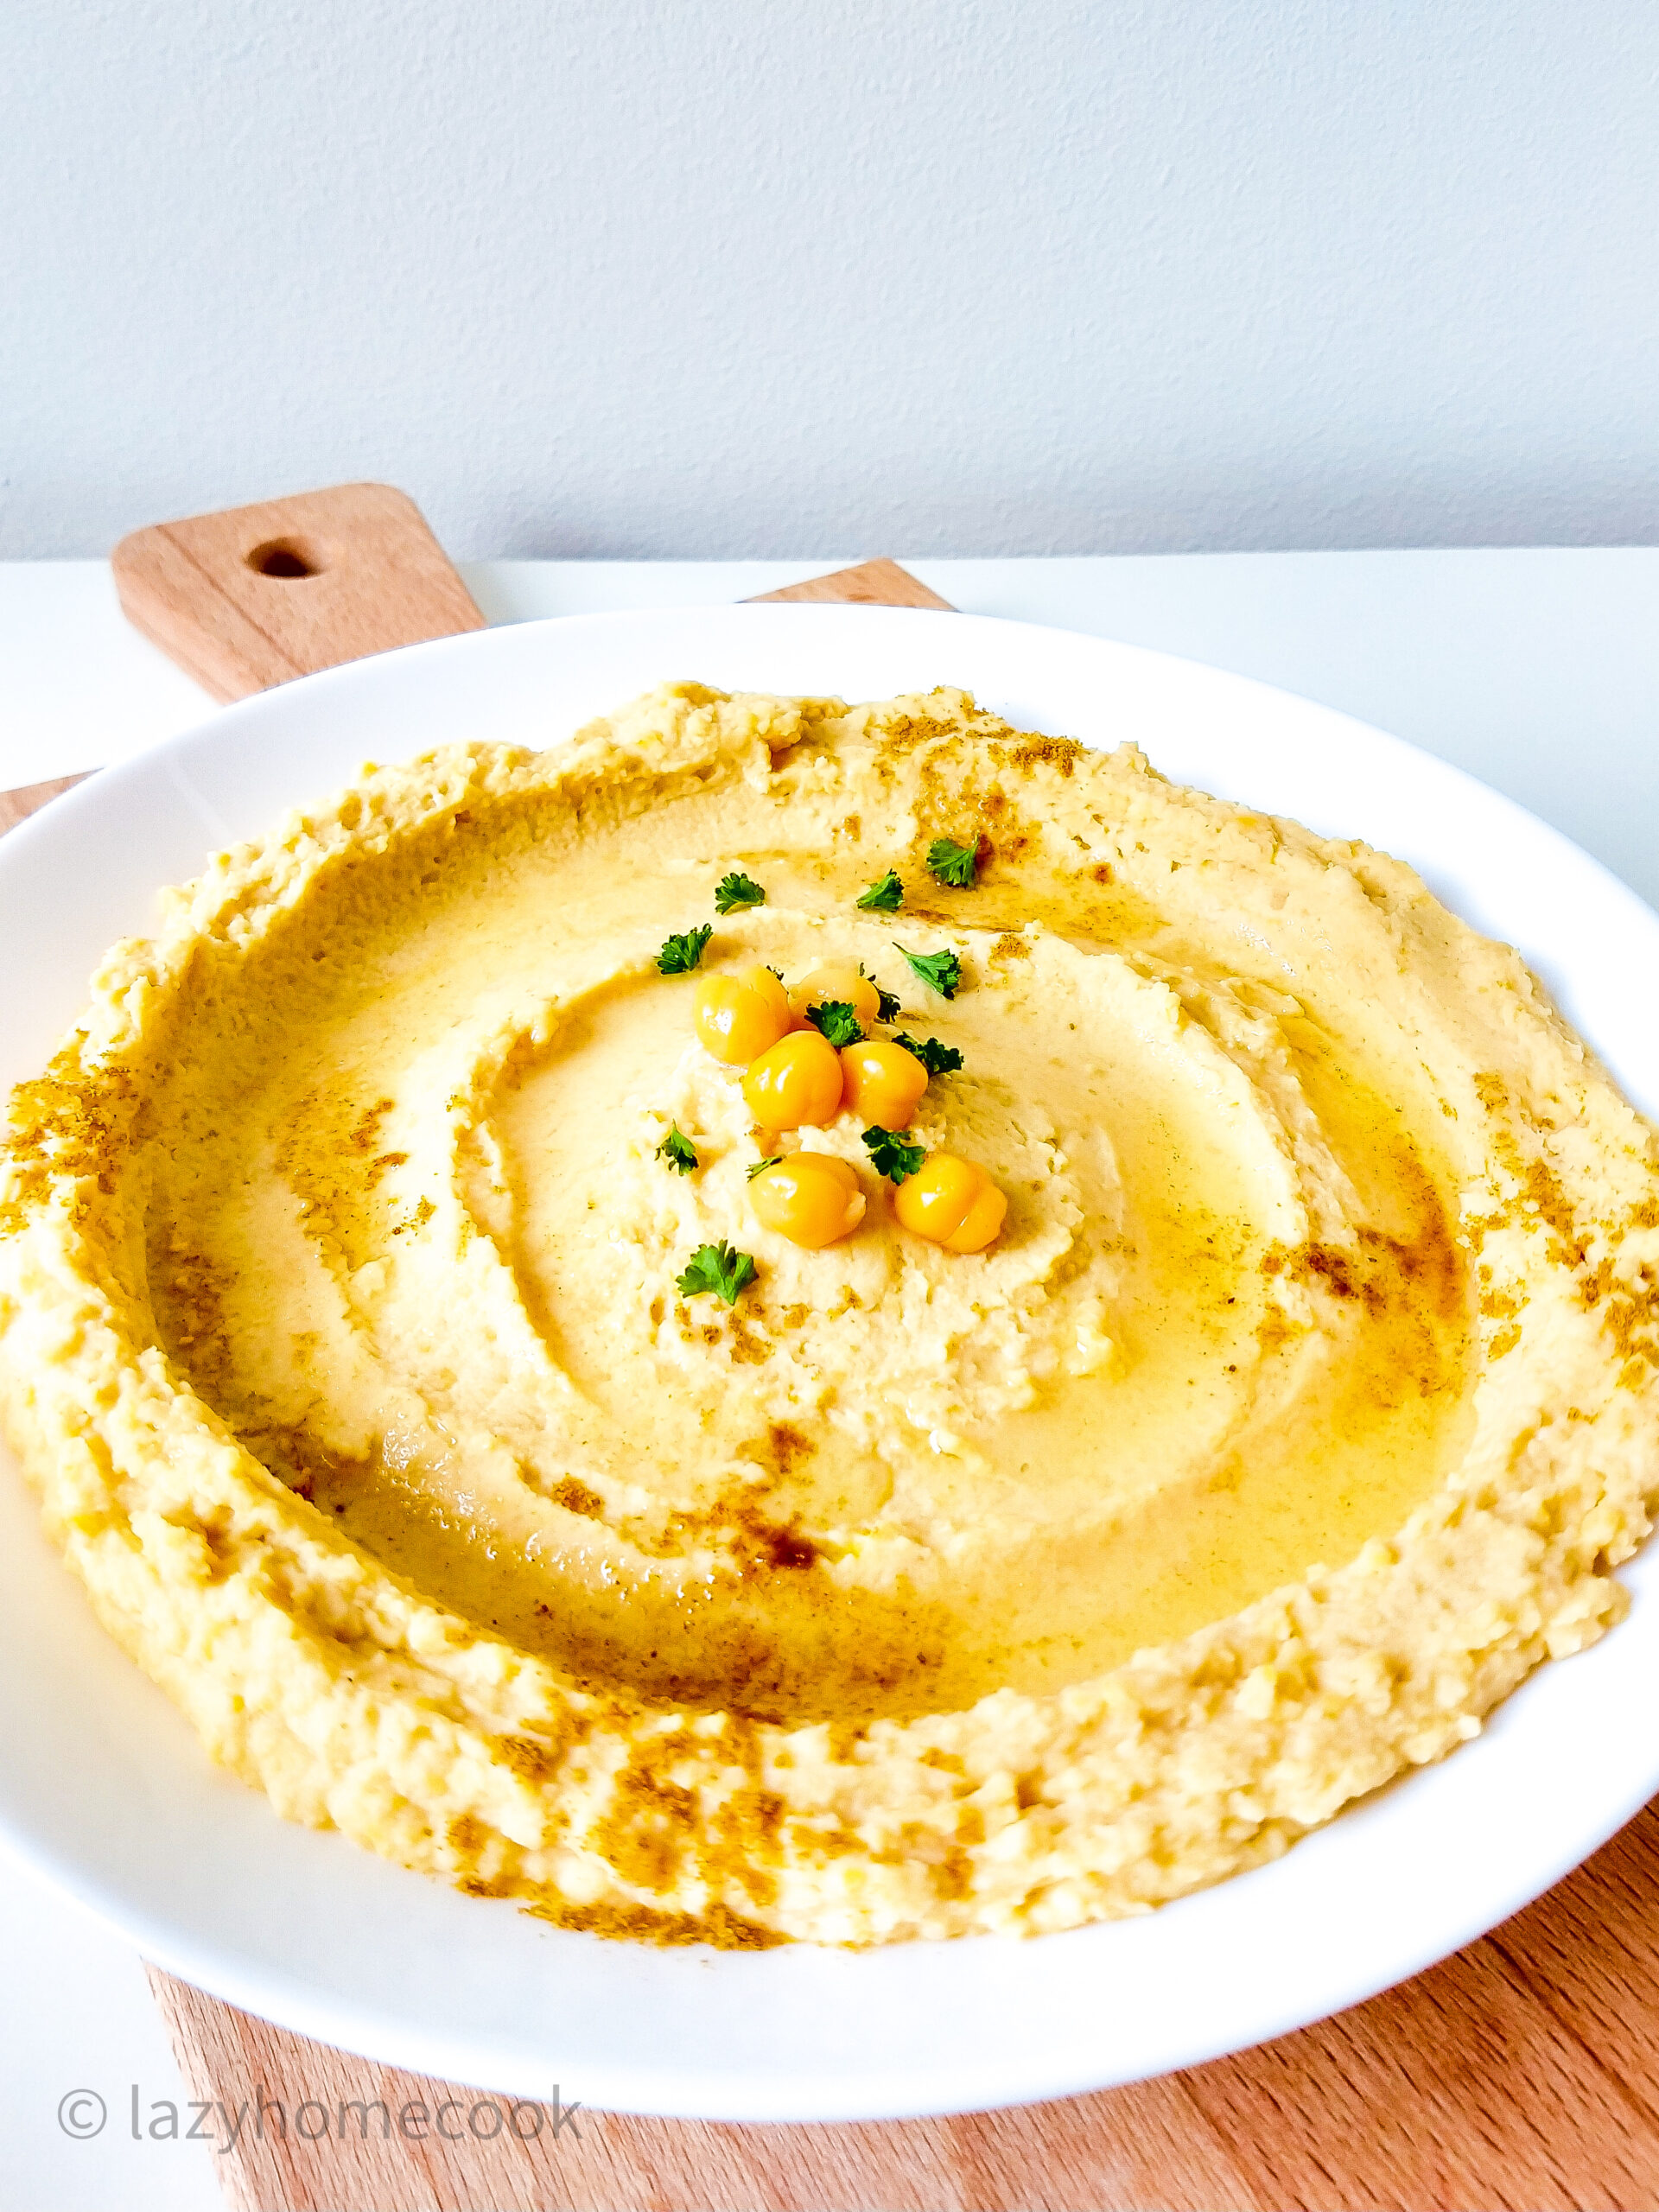 Hummus from dried chickpeas